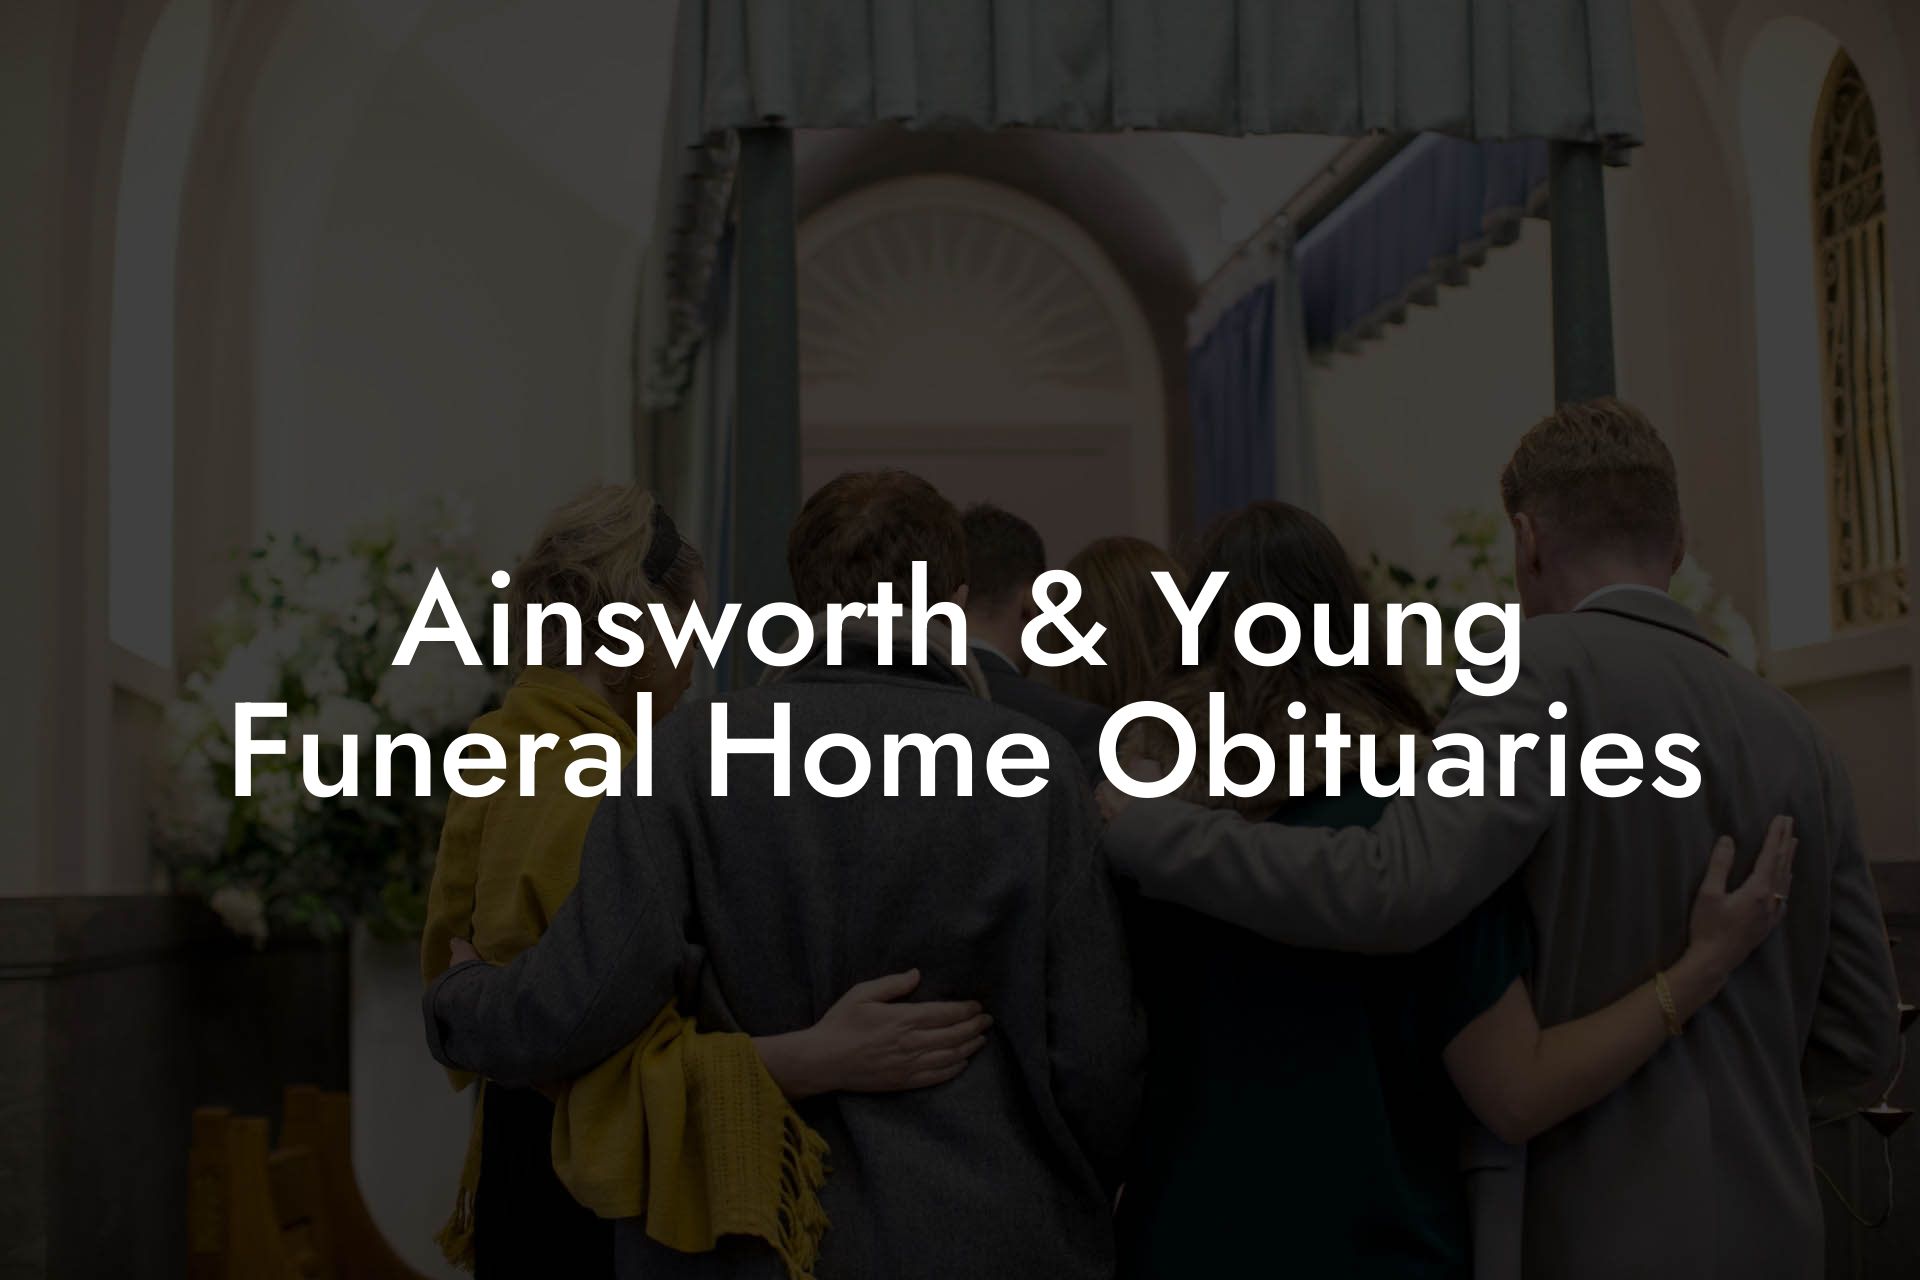 Ainsworth & Young Funeral Home Obituaries